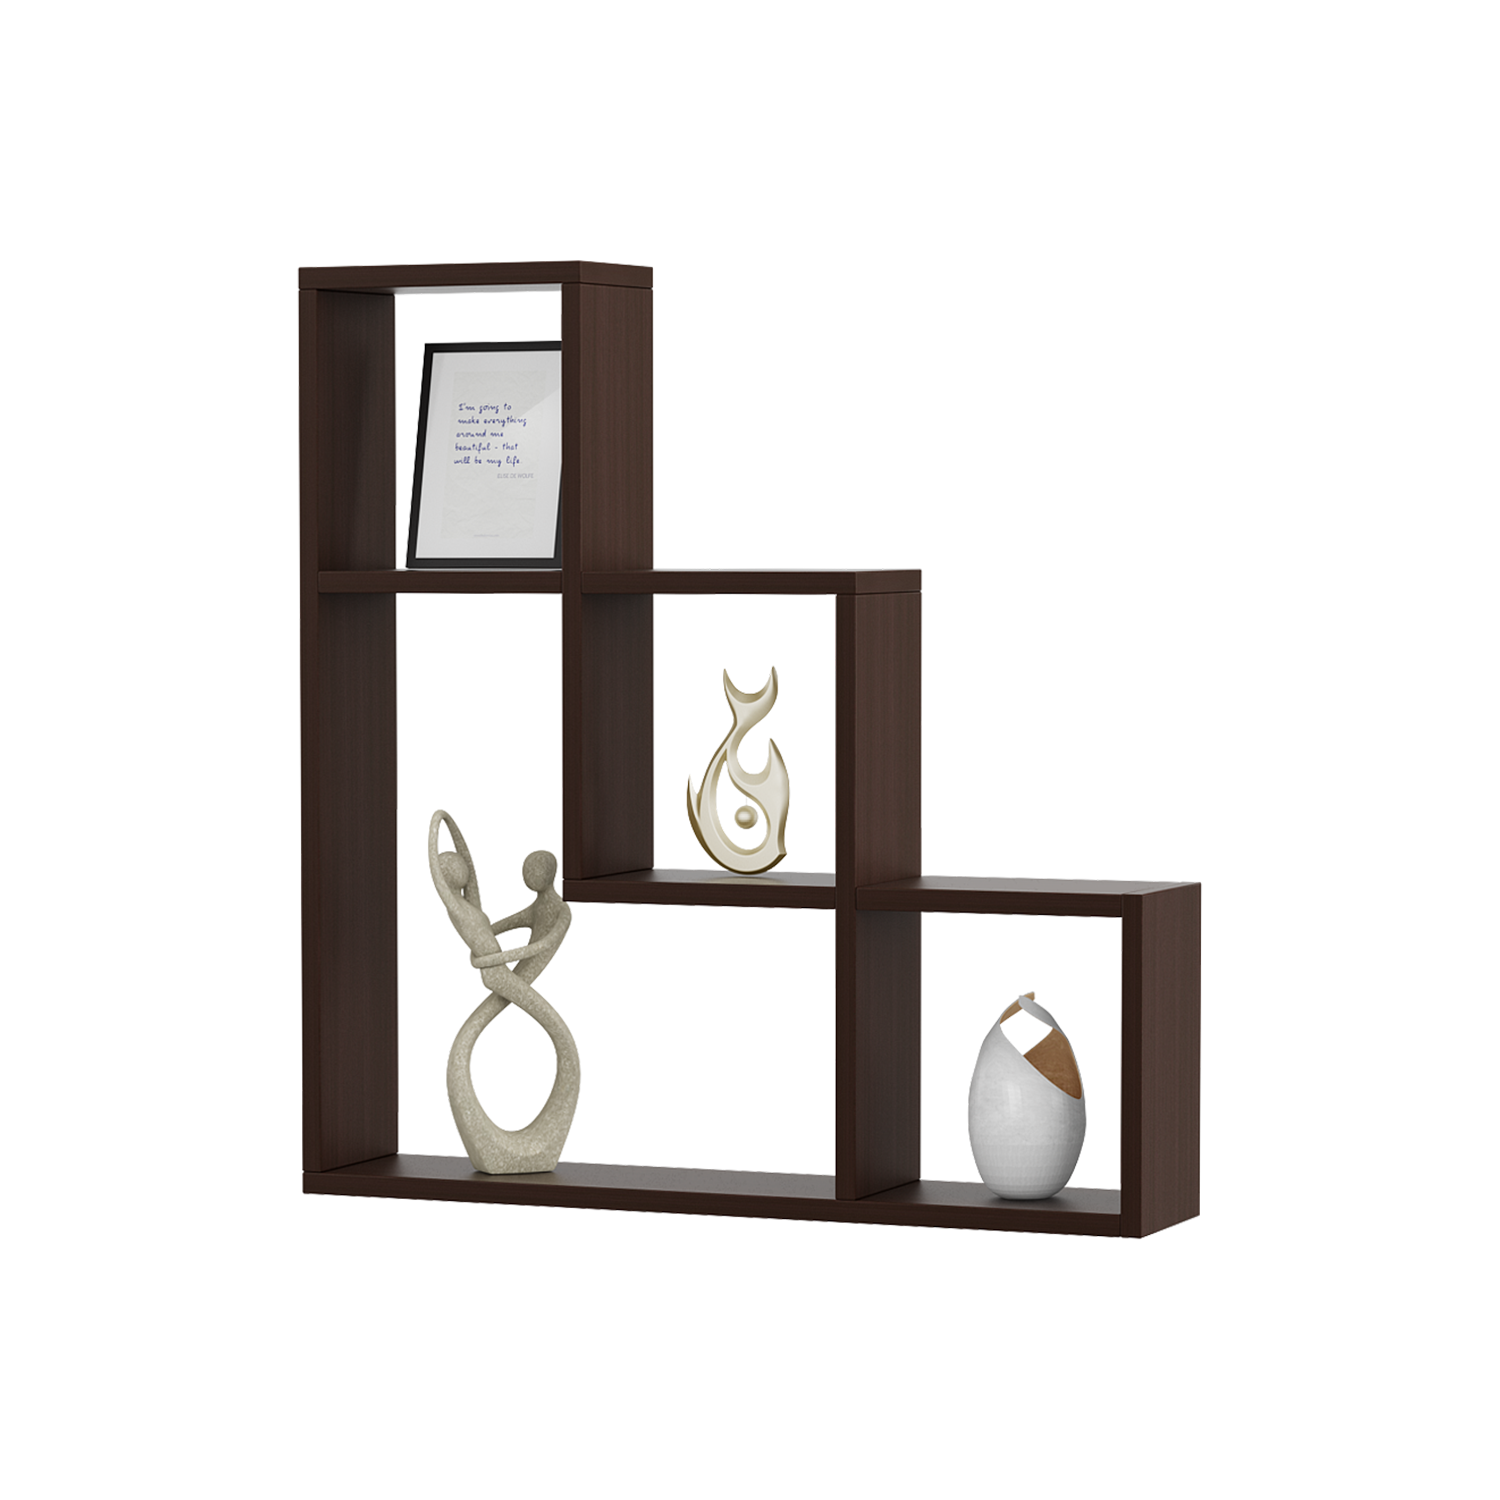 Buy Decorative Wall Shelves online at best prices in India